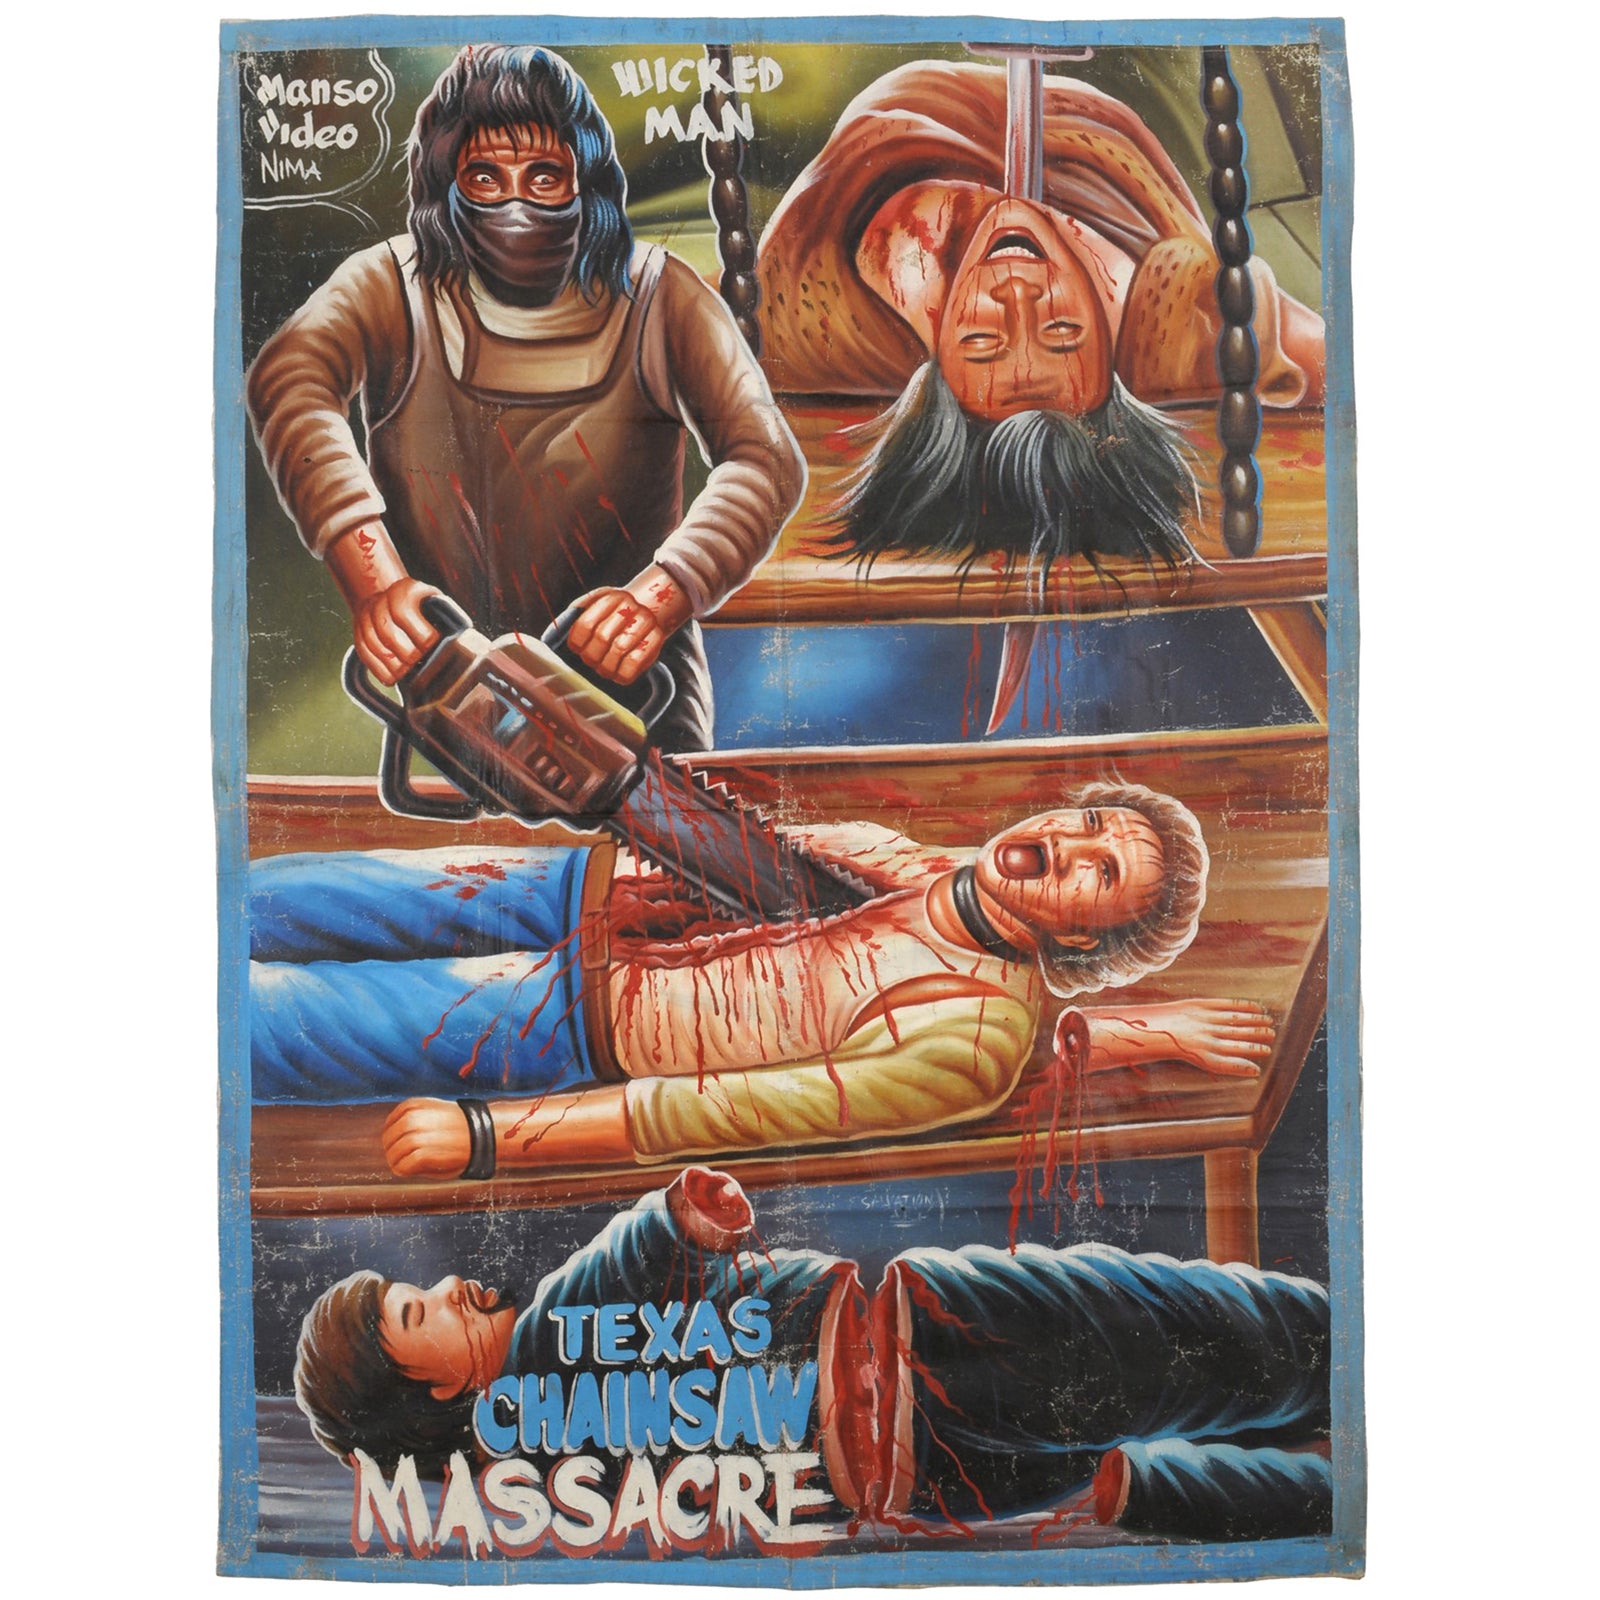 THE TEXAS CHAINSAW MASSACRE MOVIE POSTER HAND PAINTED IN GHANA FOR THE LOCAL CINEMA